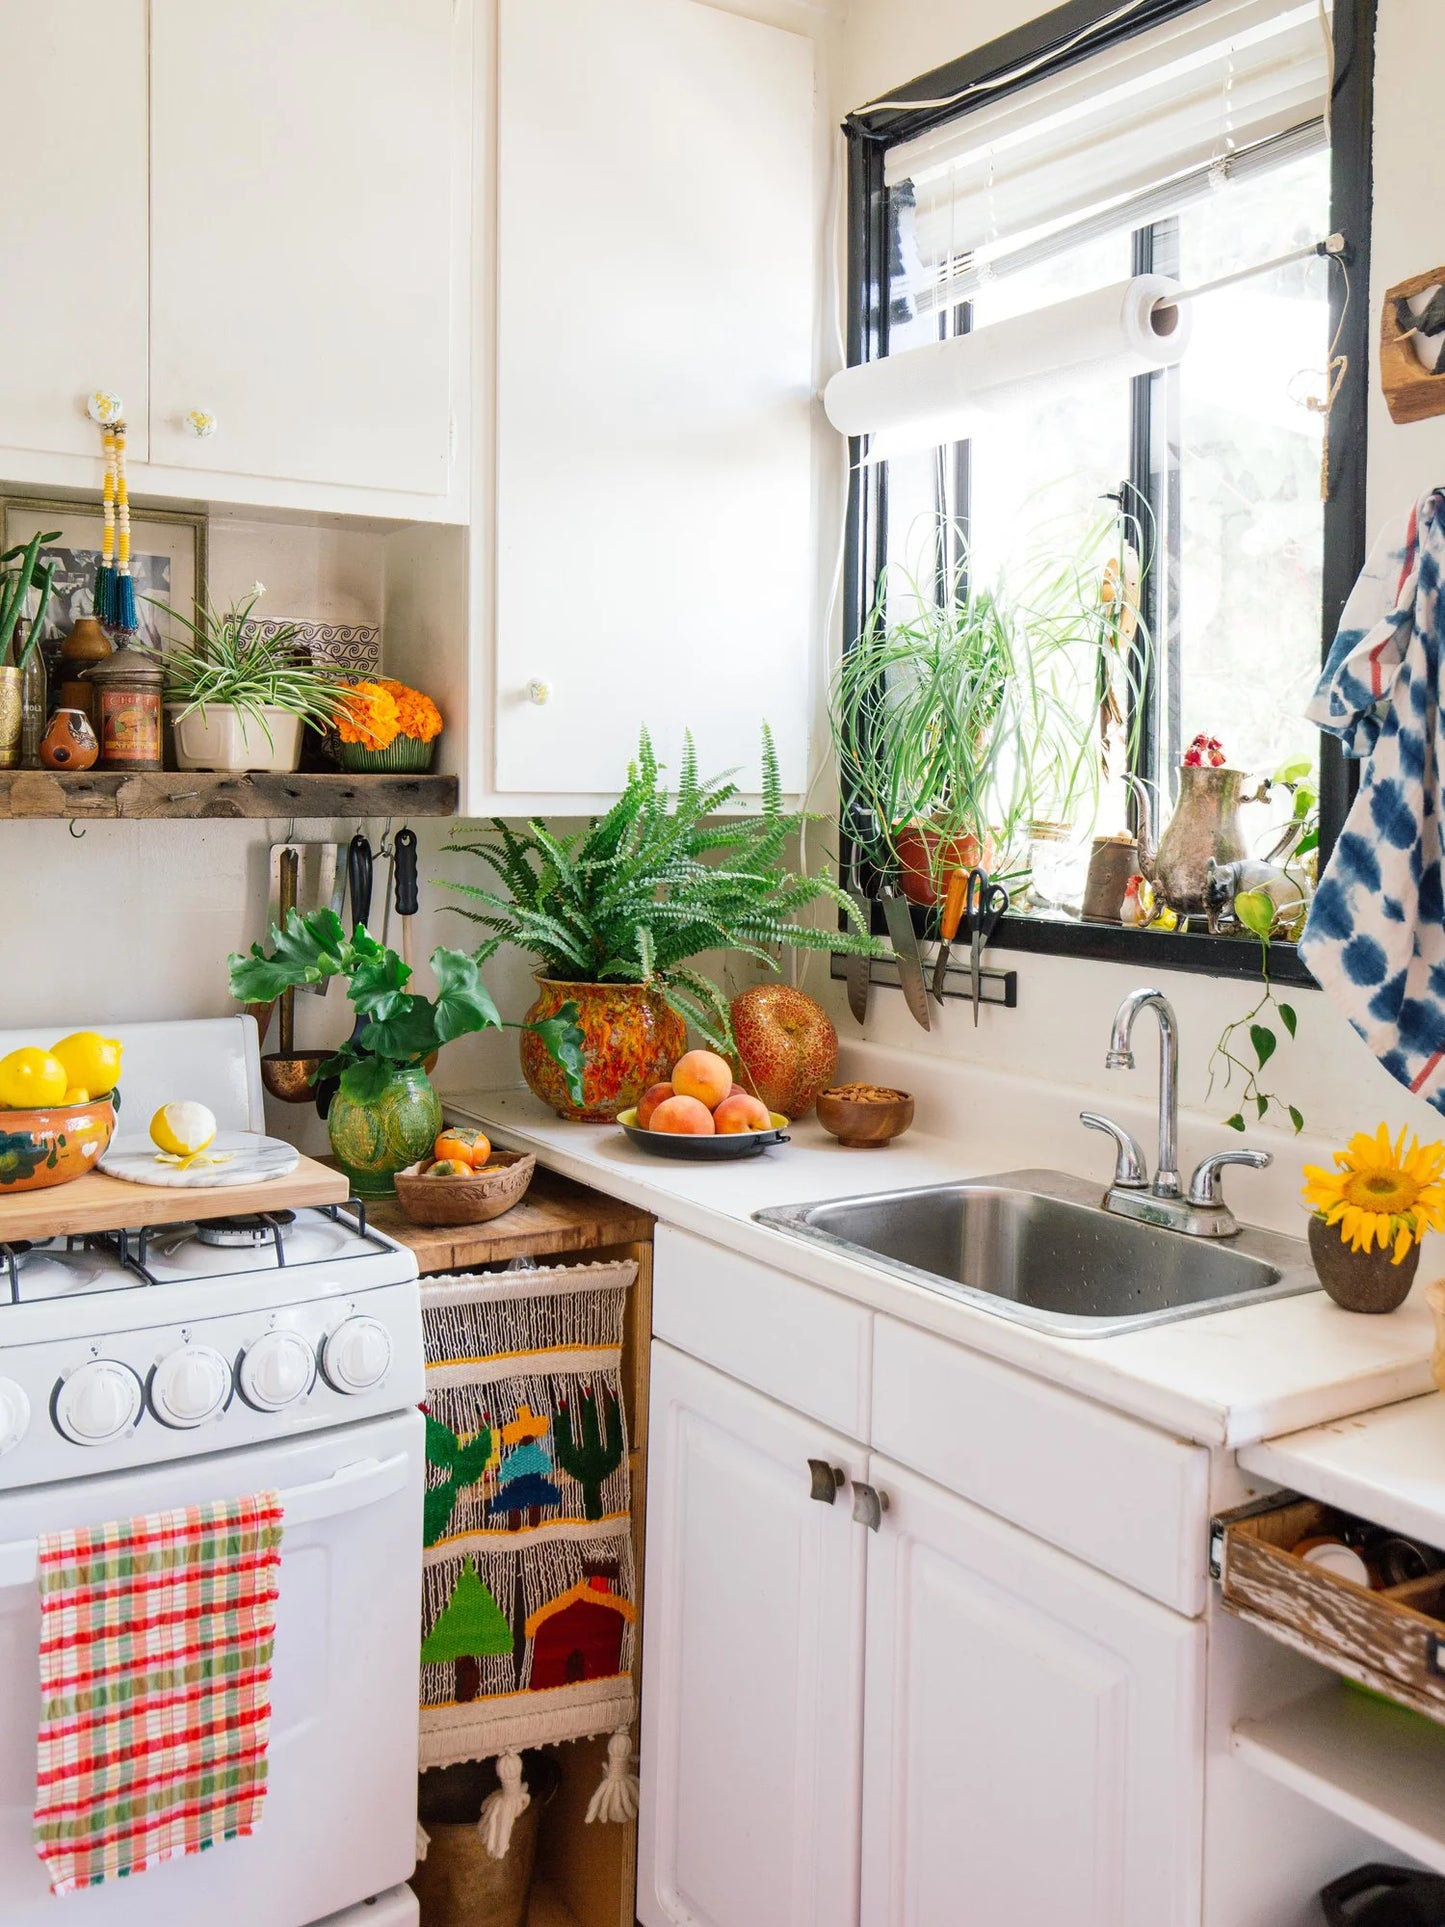 50 Small Kitchen Ideas: How to Make Your Tiny Space Work Harder